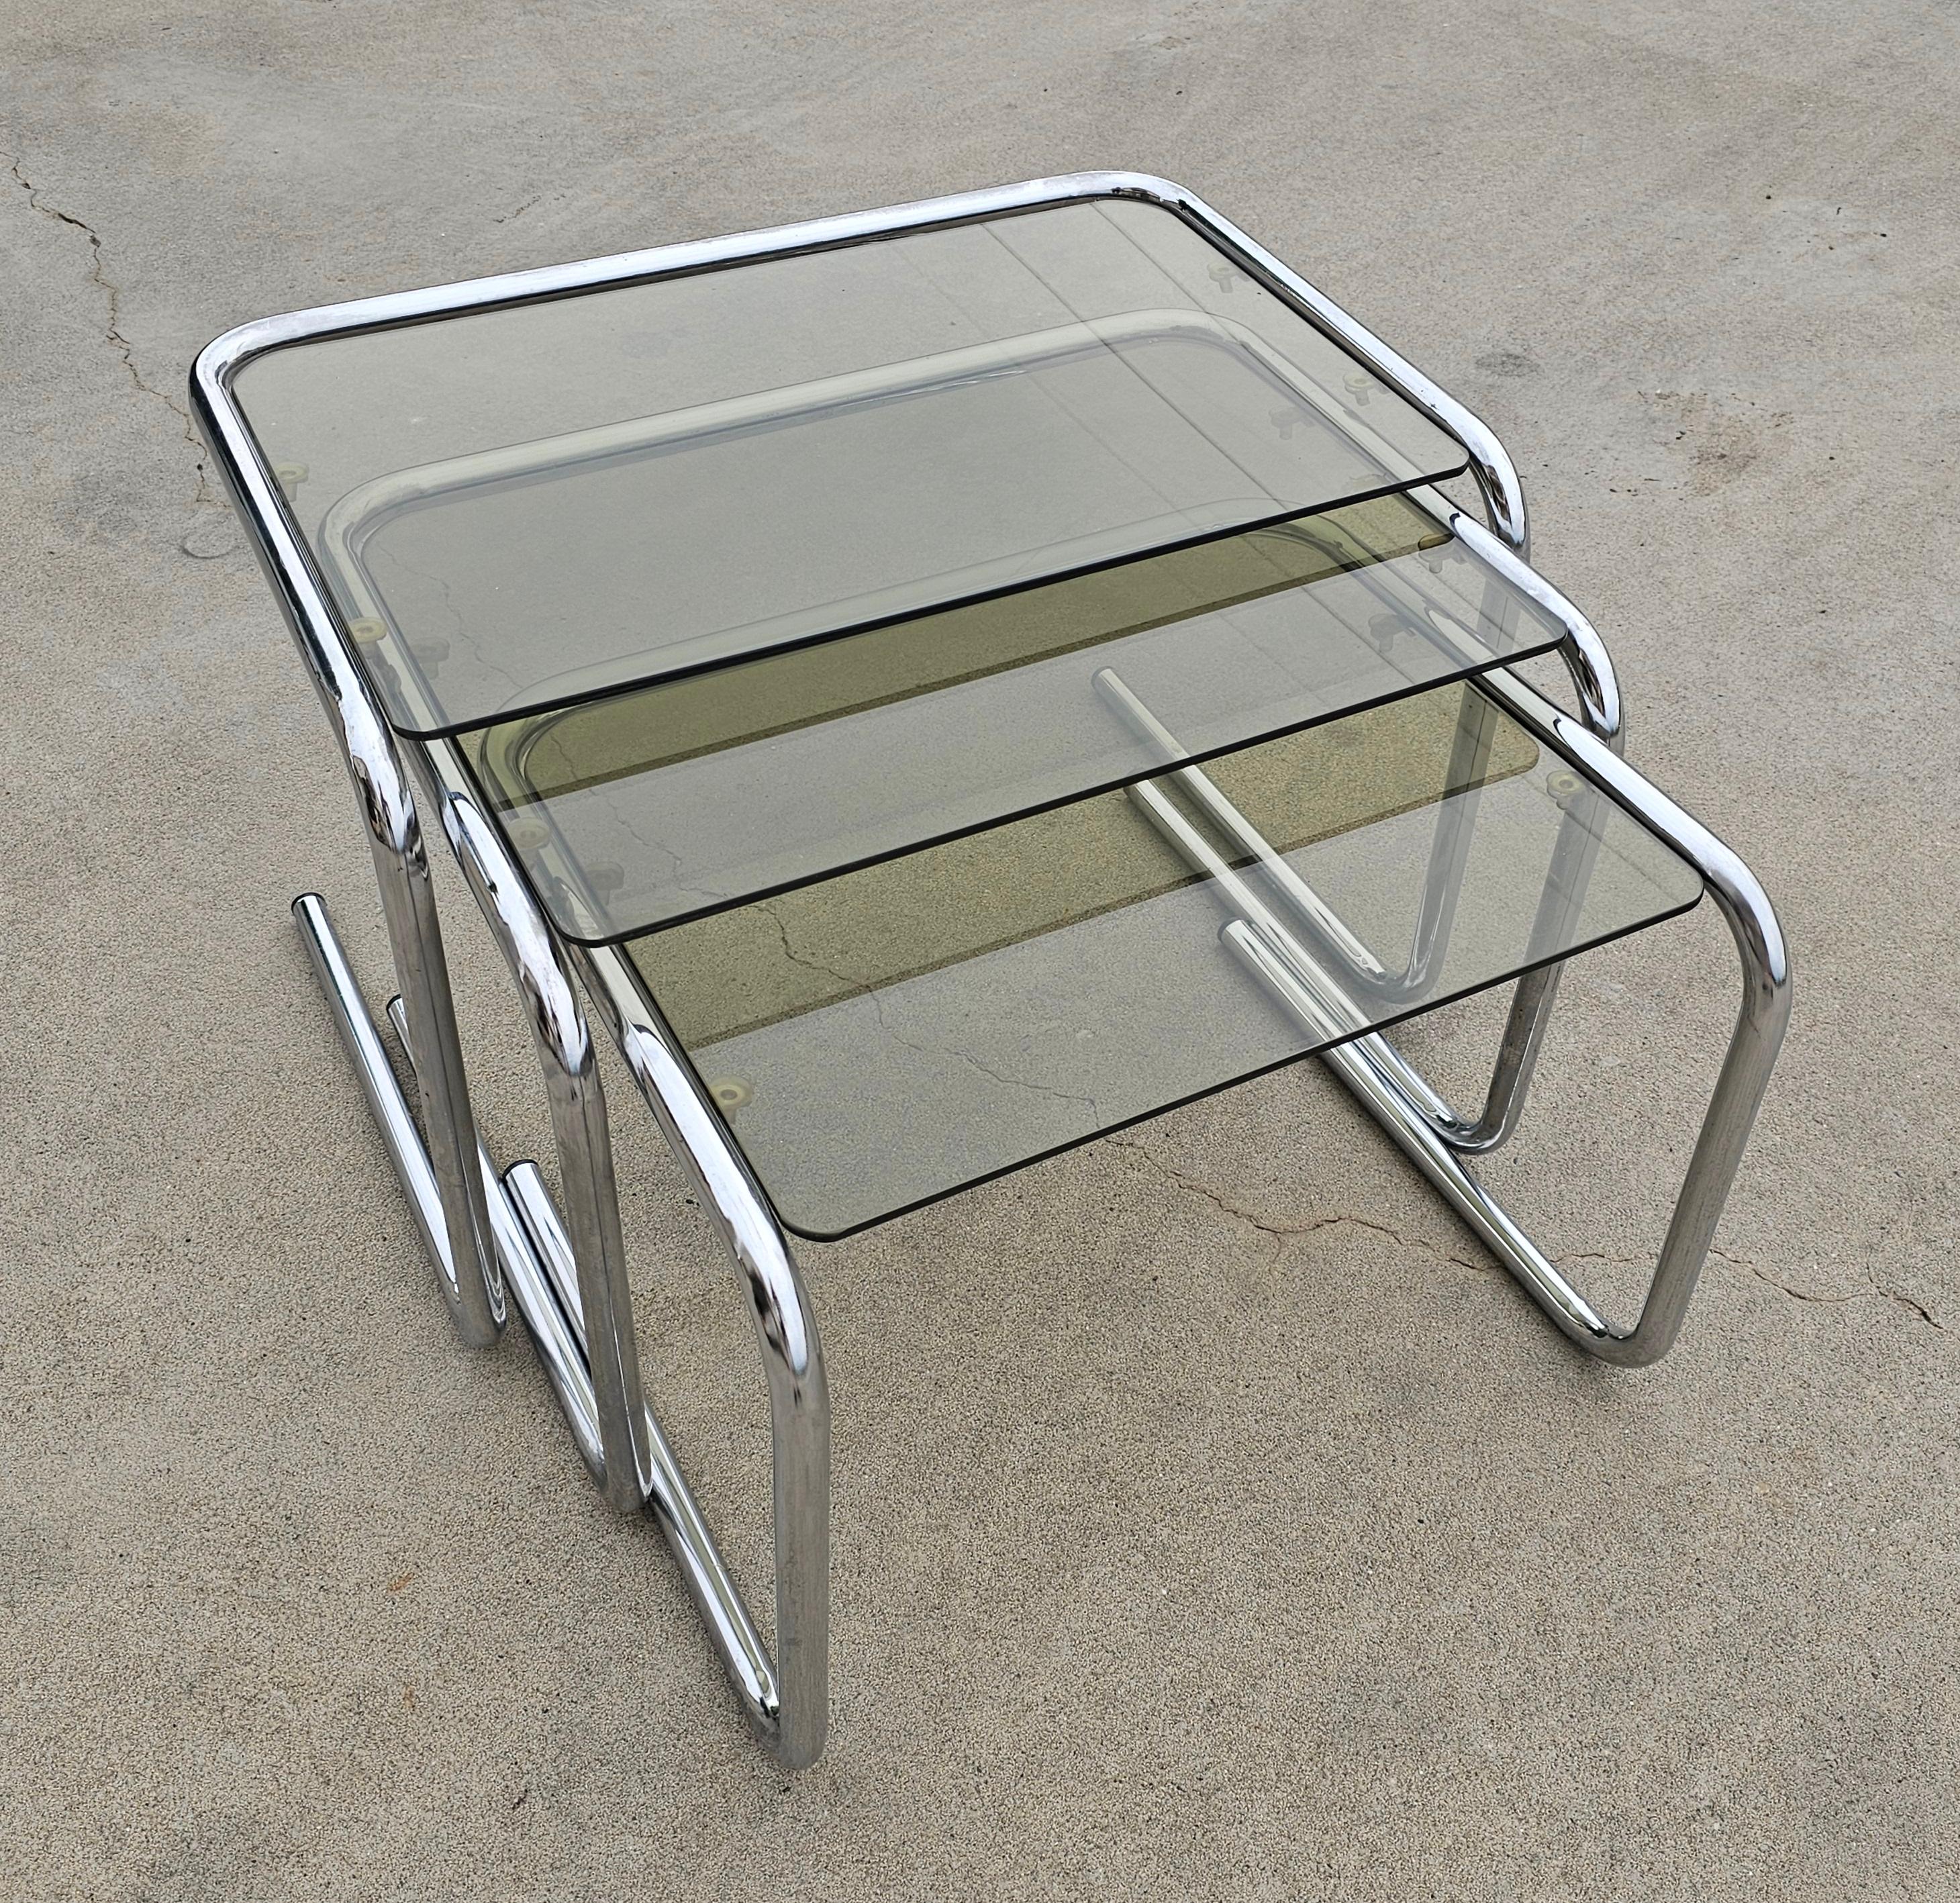 Milo Baughman style Chrome and Smoked Glass Nesting Tables, Italy 1970s For Sale 3